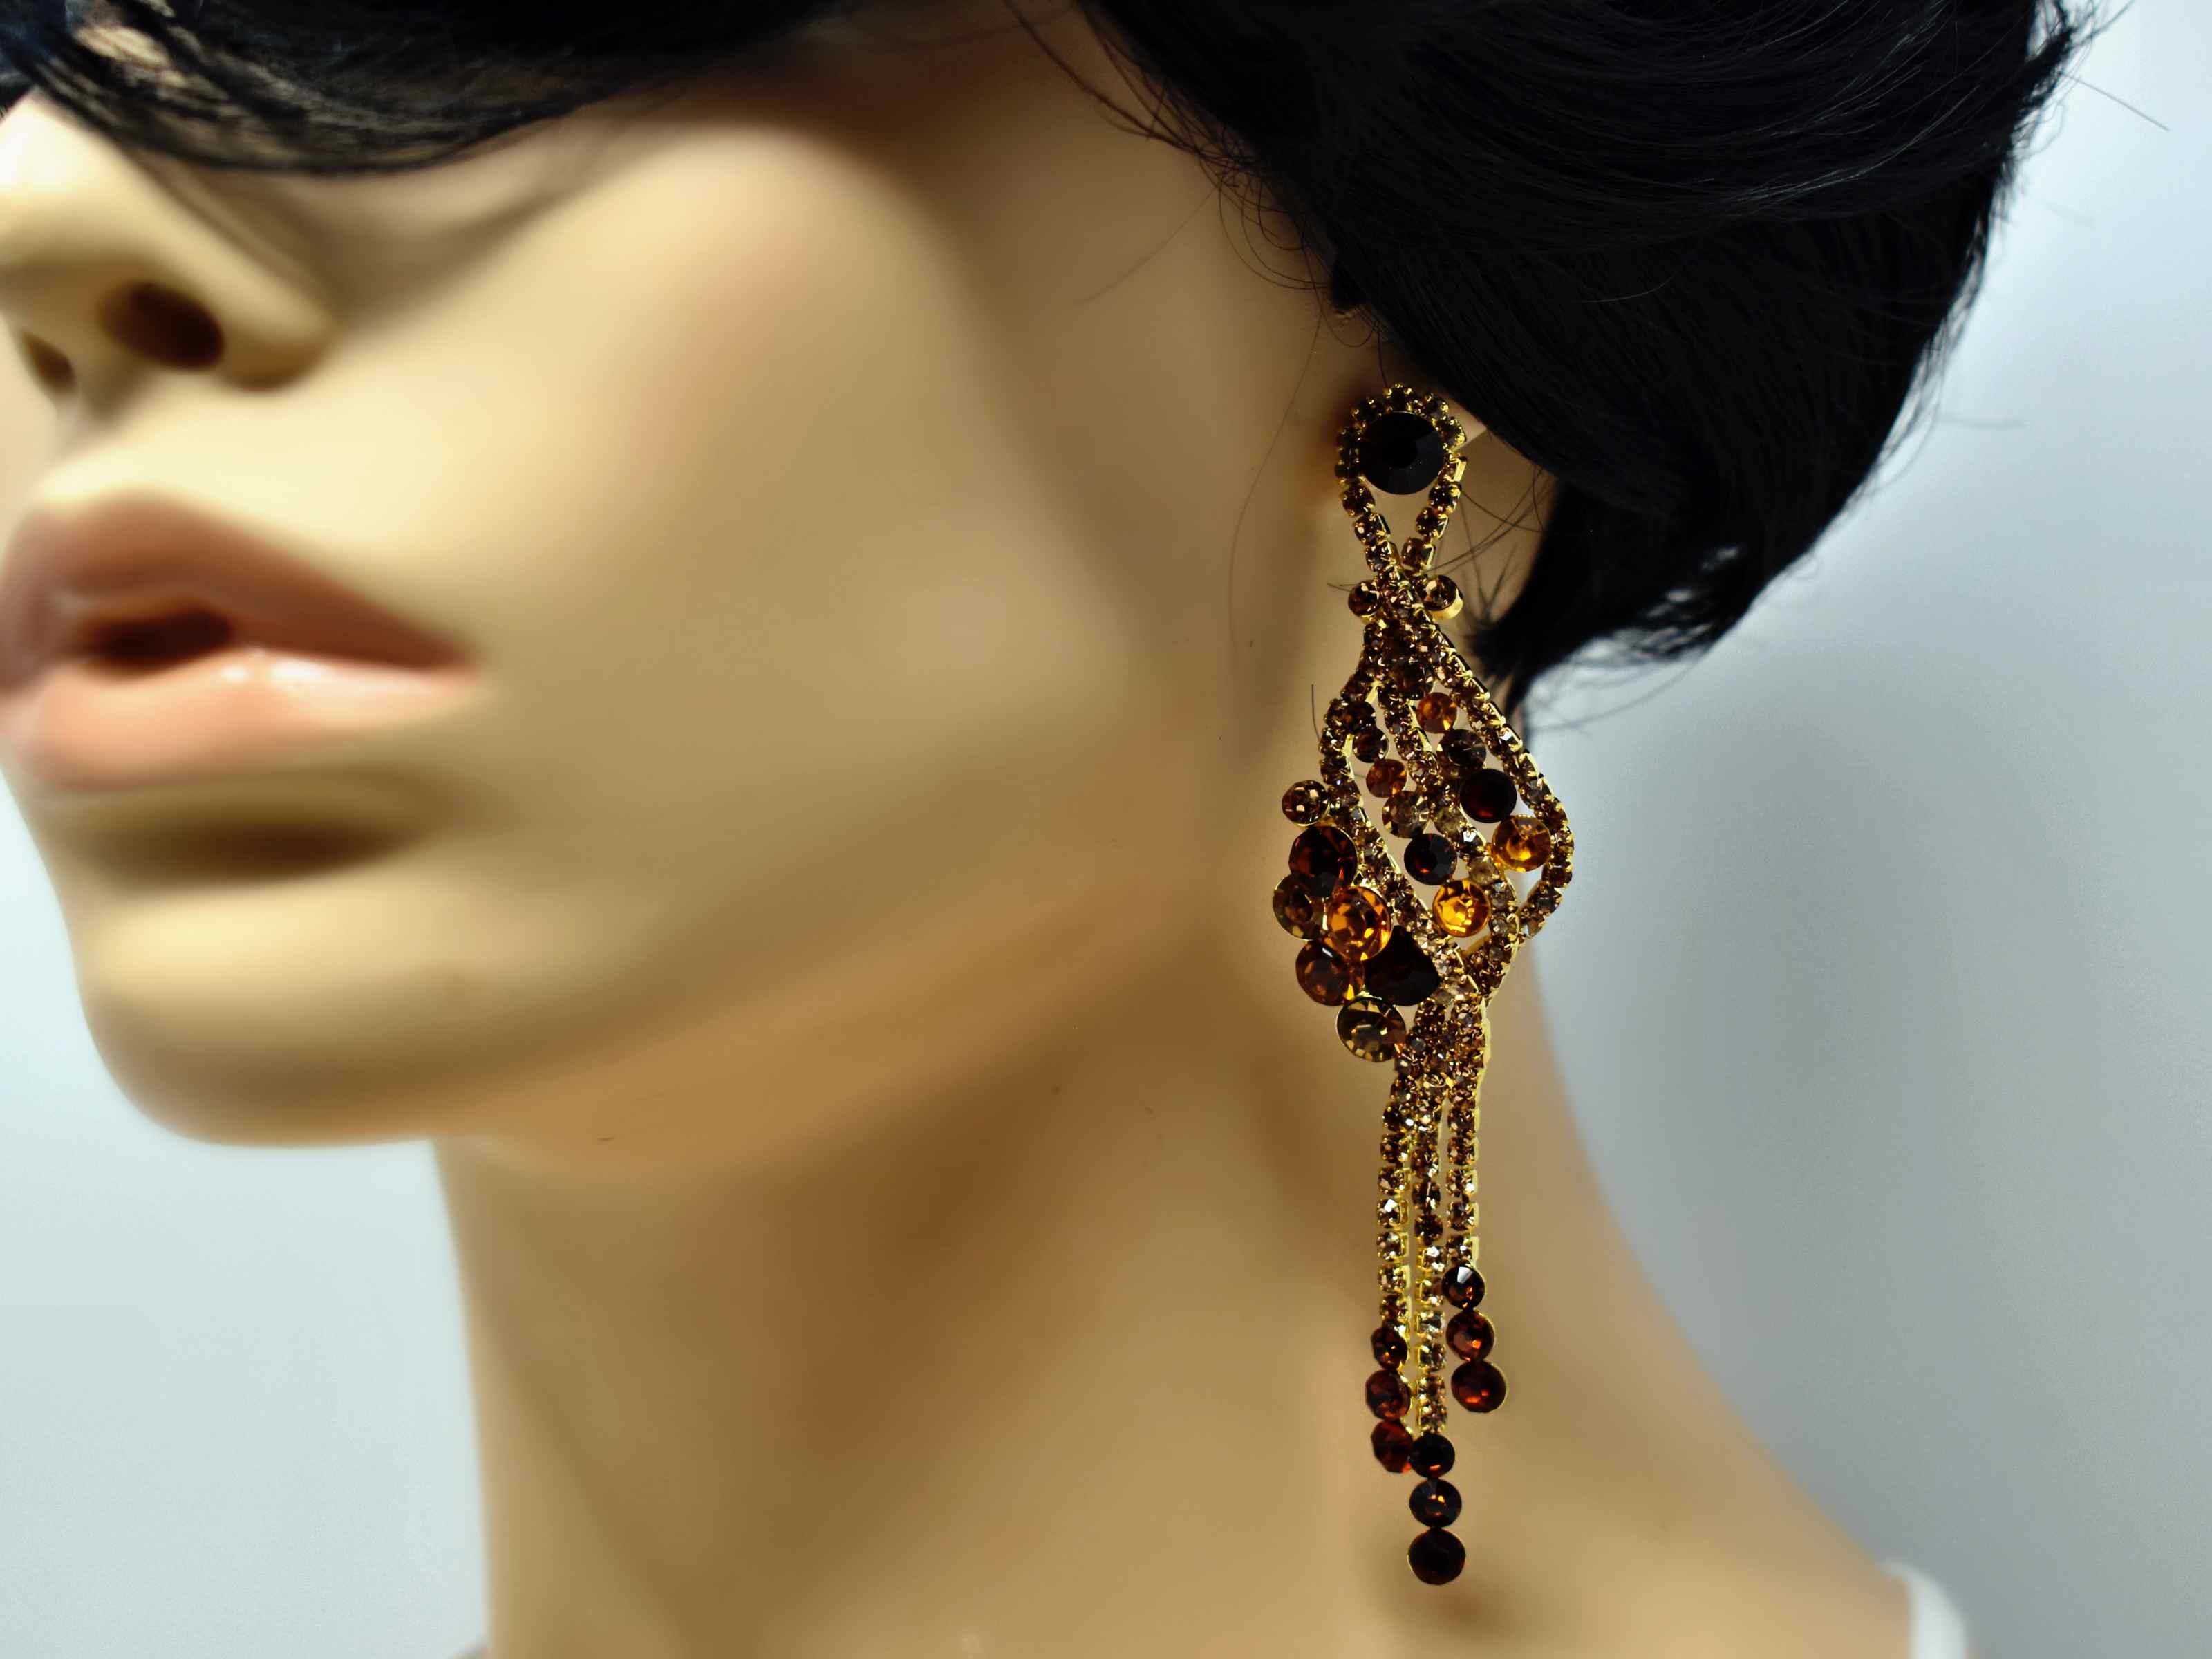 Our Stunning Ixia dangle gold statement earrings are a sure show stopper. These earrings with their tan and brown stones are 4 inches in length with a push pack clasp.